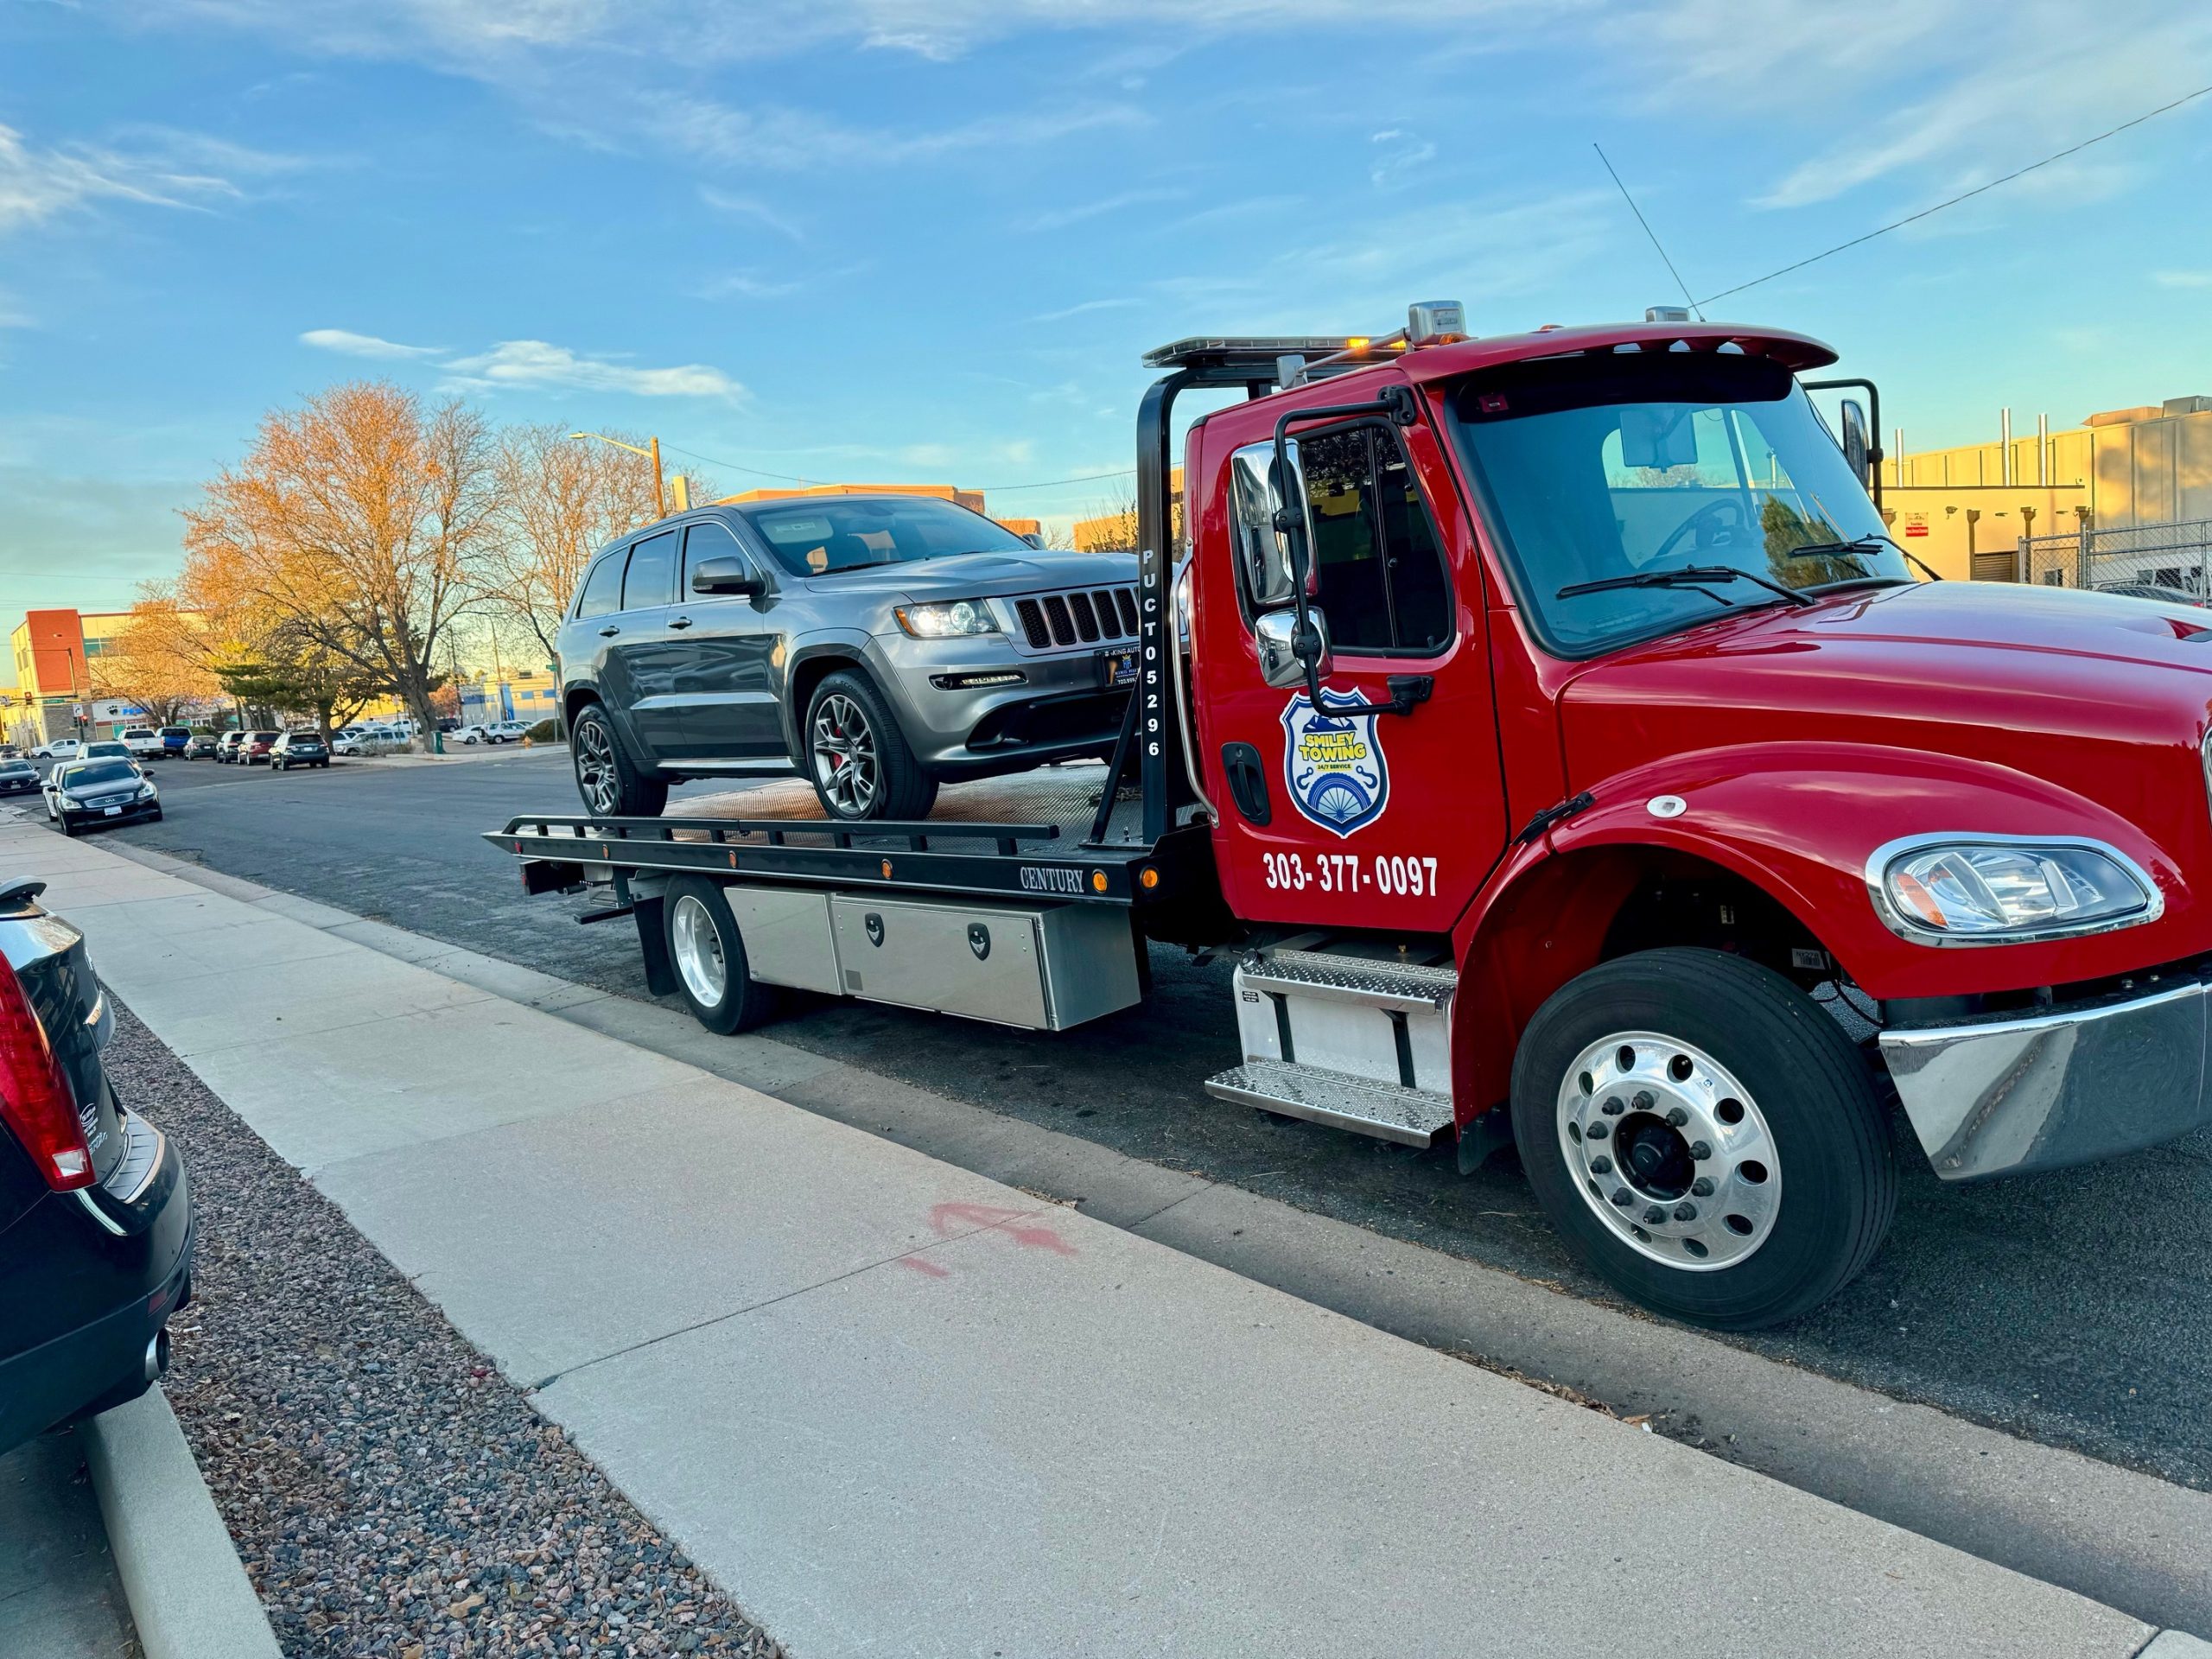 this image shows towing services in Columbine, CO